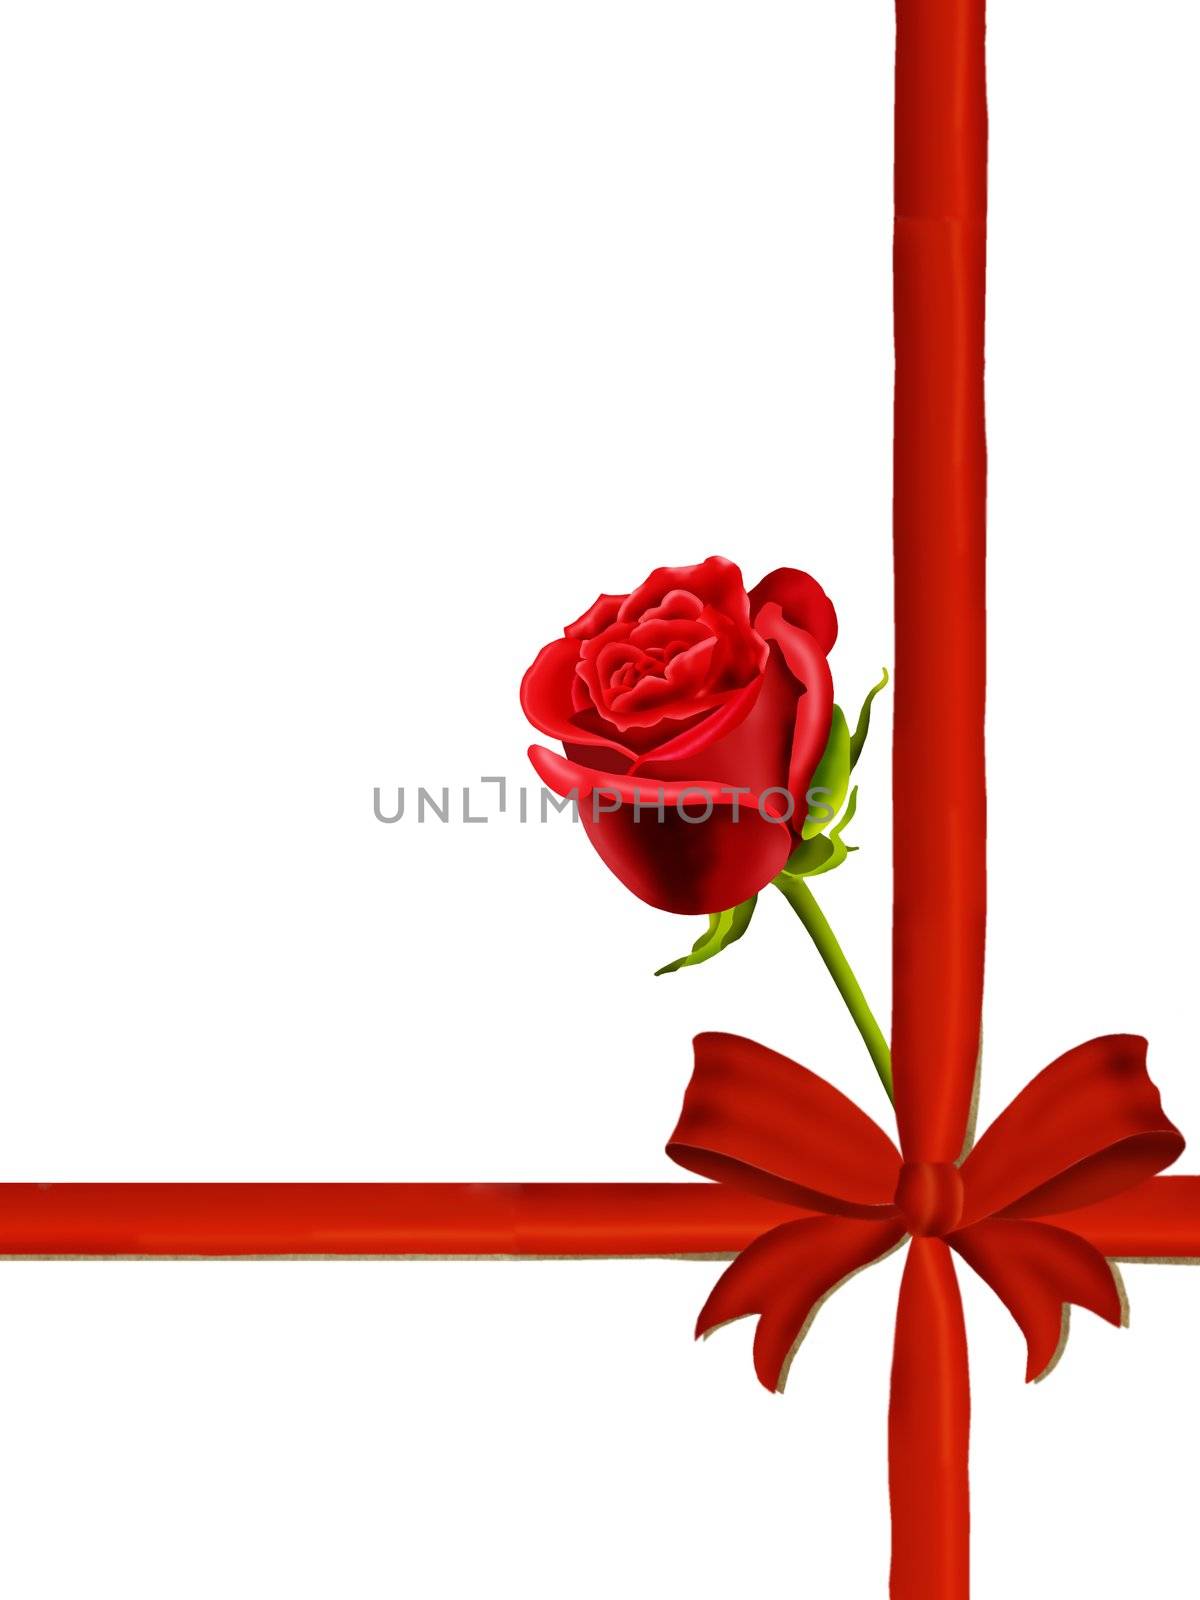 Mother’s Day or birthday card to mum with a single red rose, red ribbon and bow isolated on a white background